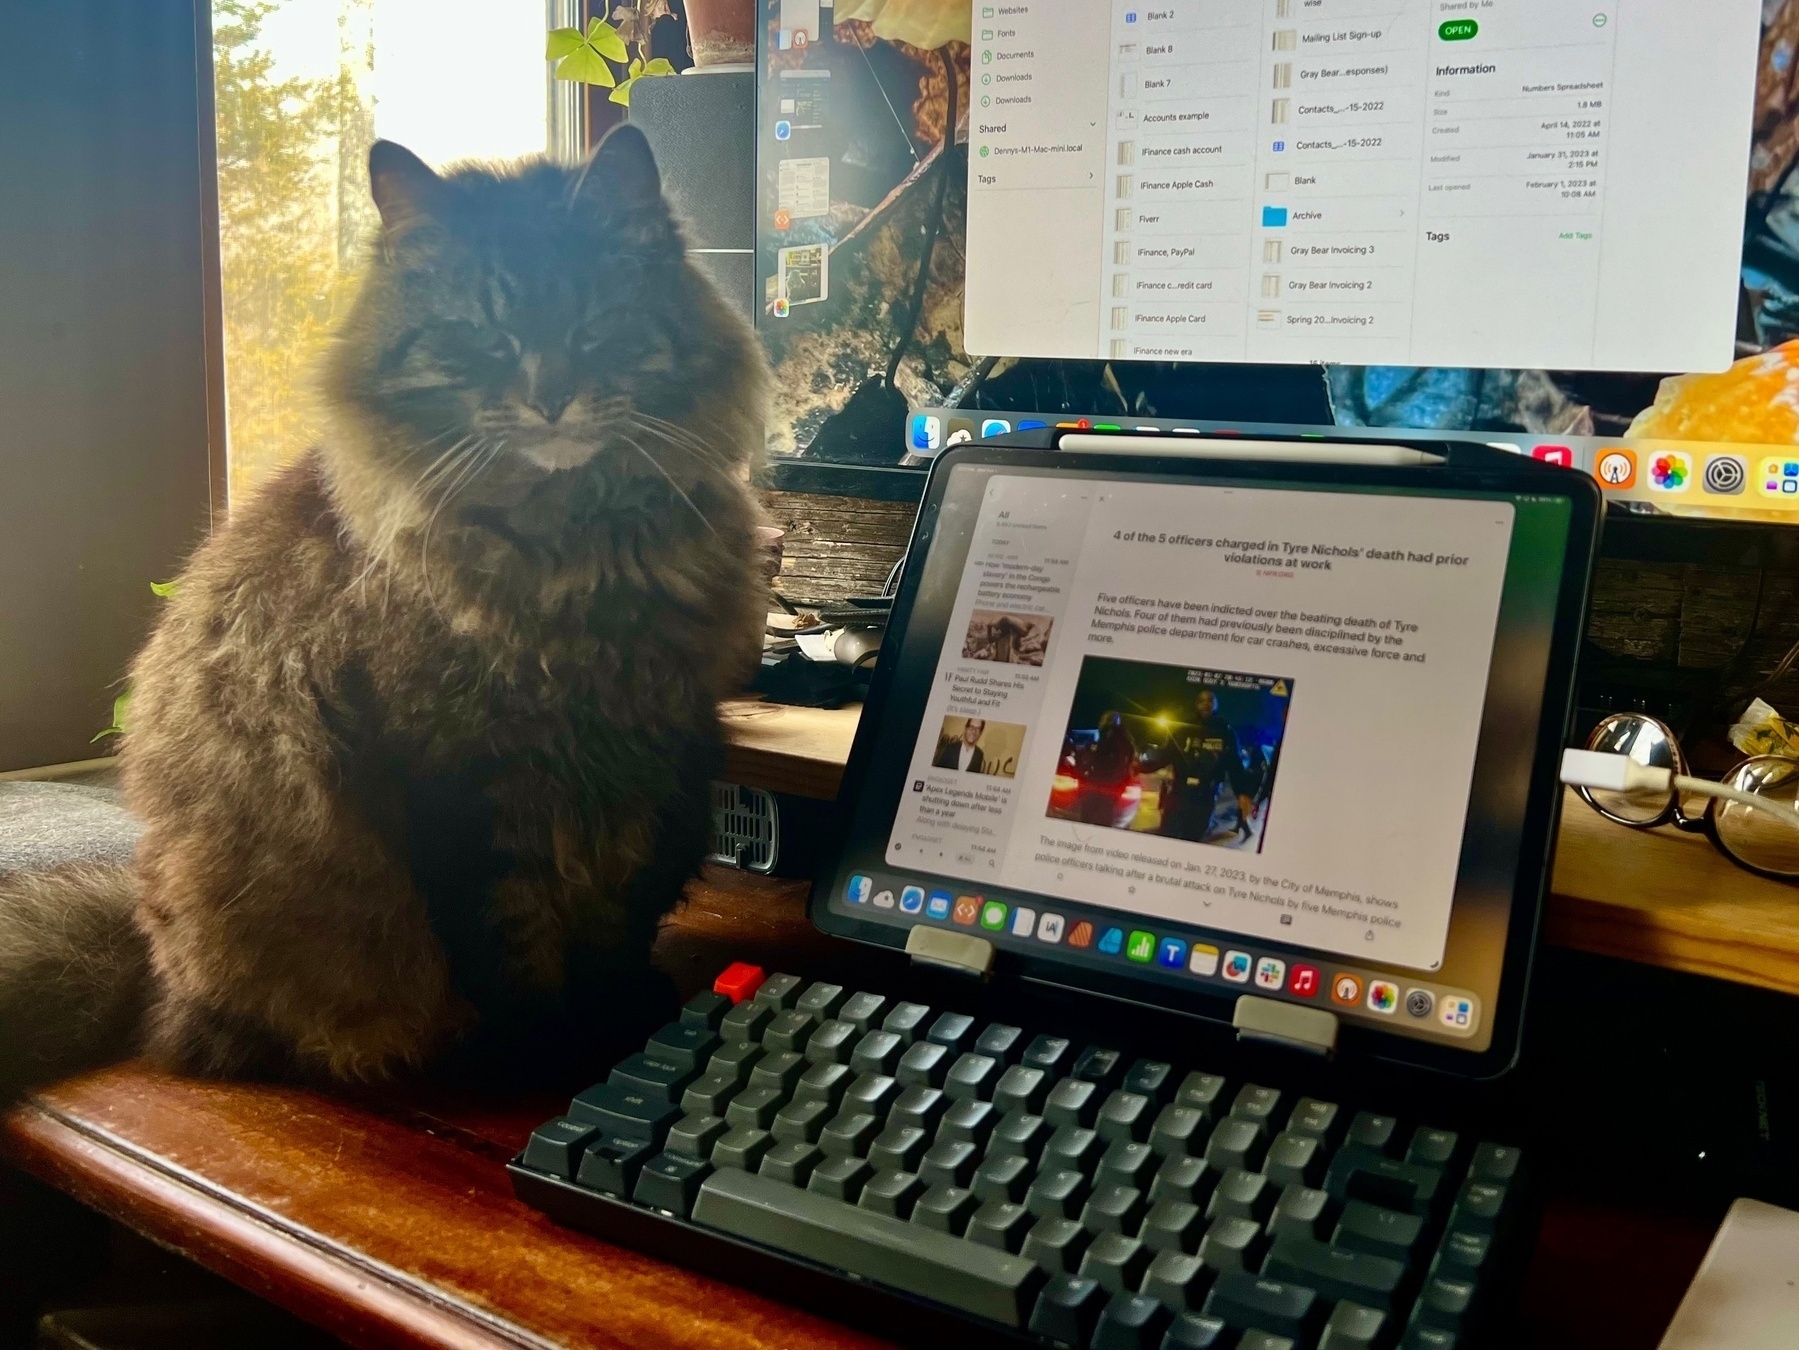 A long-haired brown cat sits on a desk near a keyboard and iPad looking at the camera menacingly.